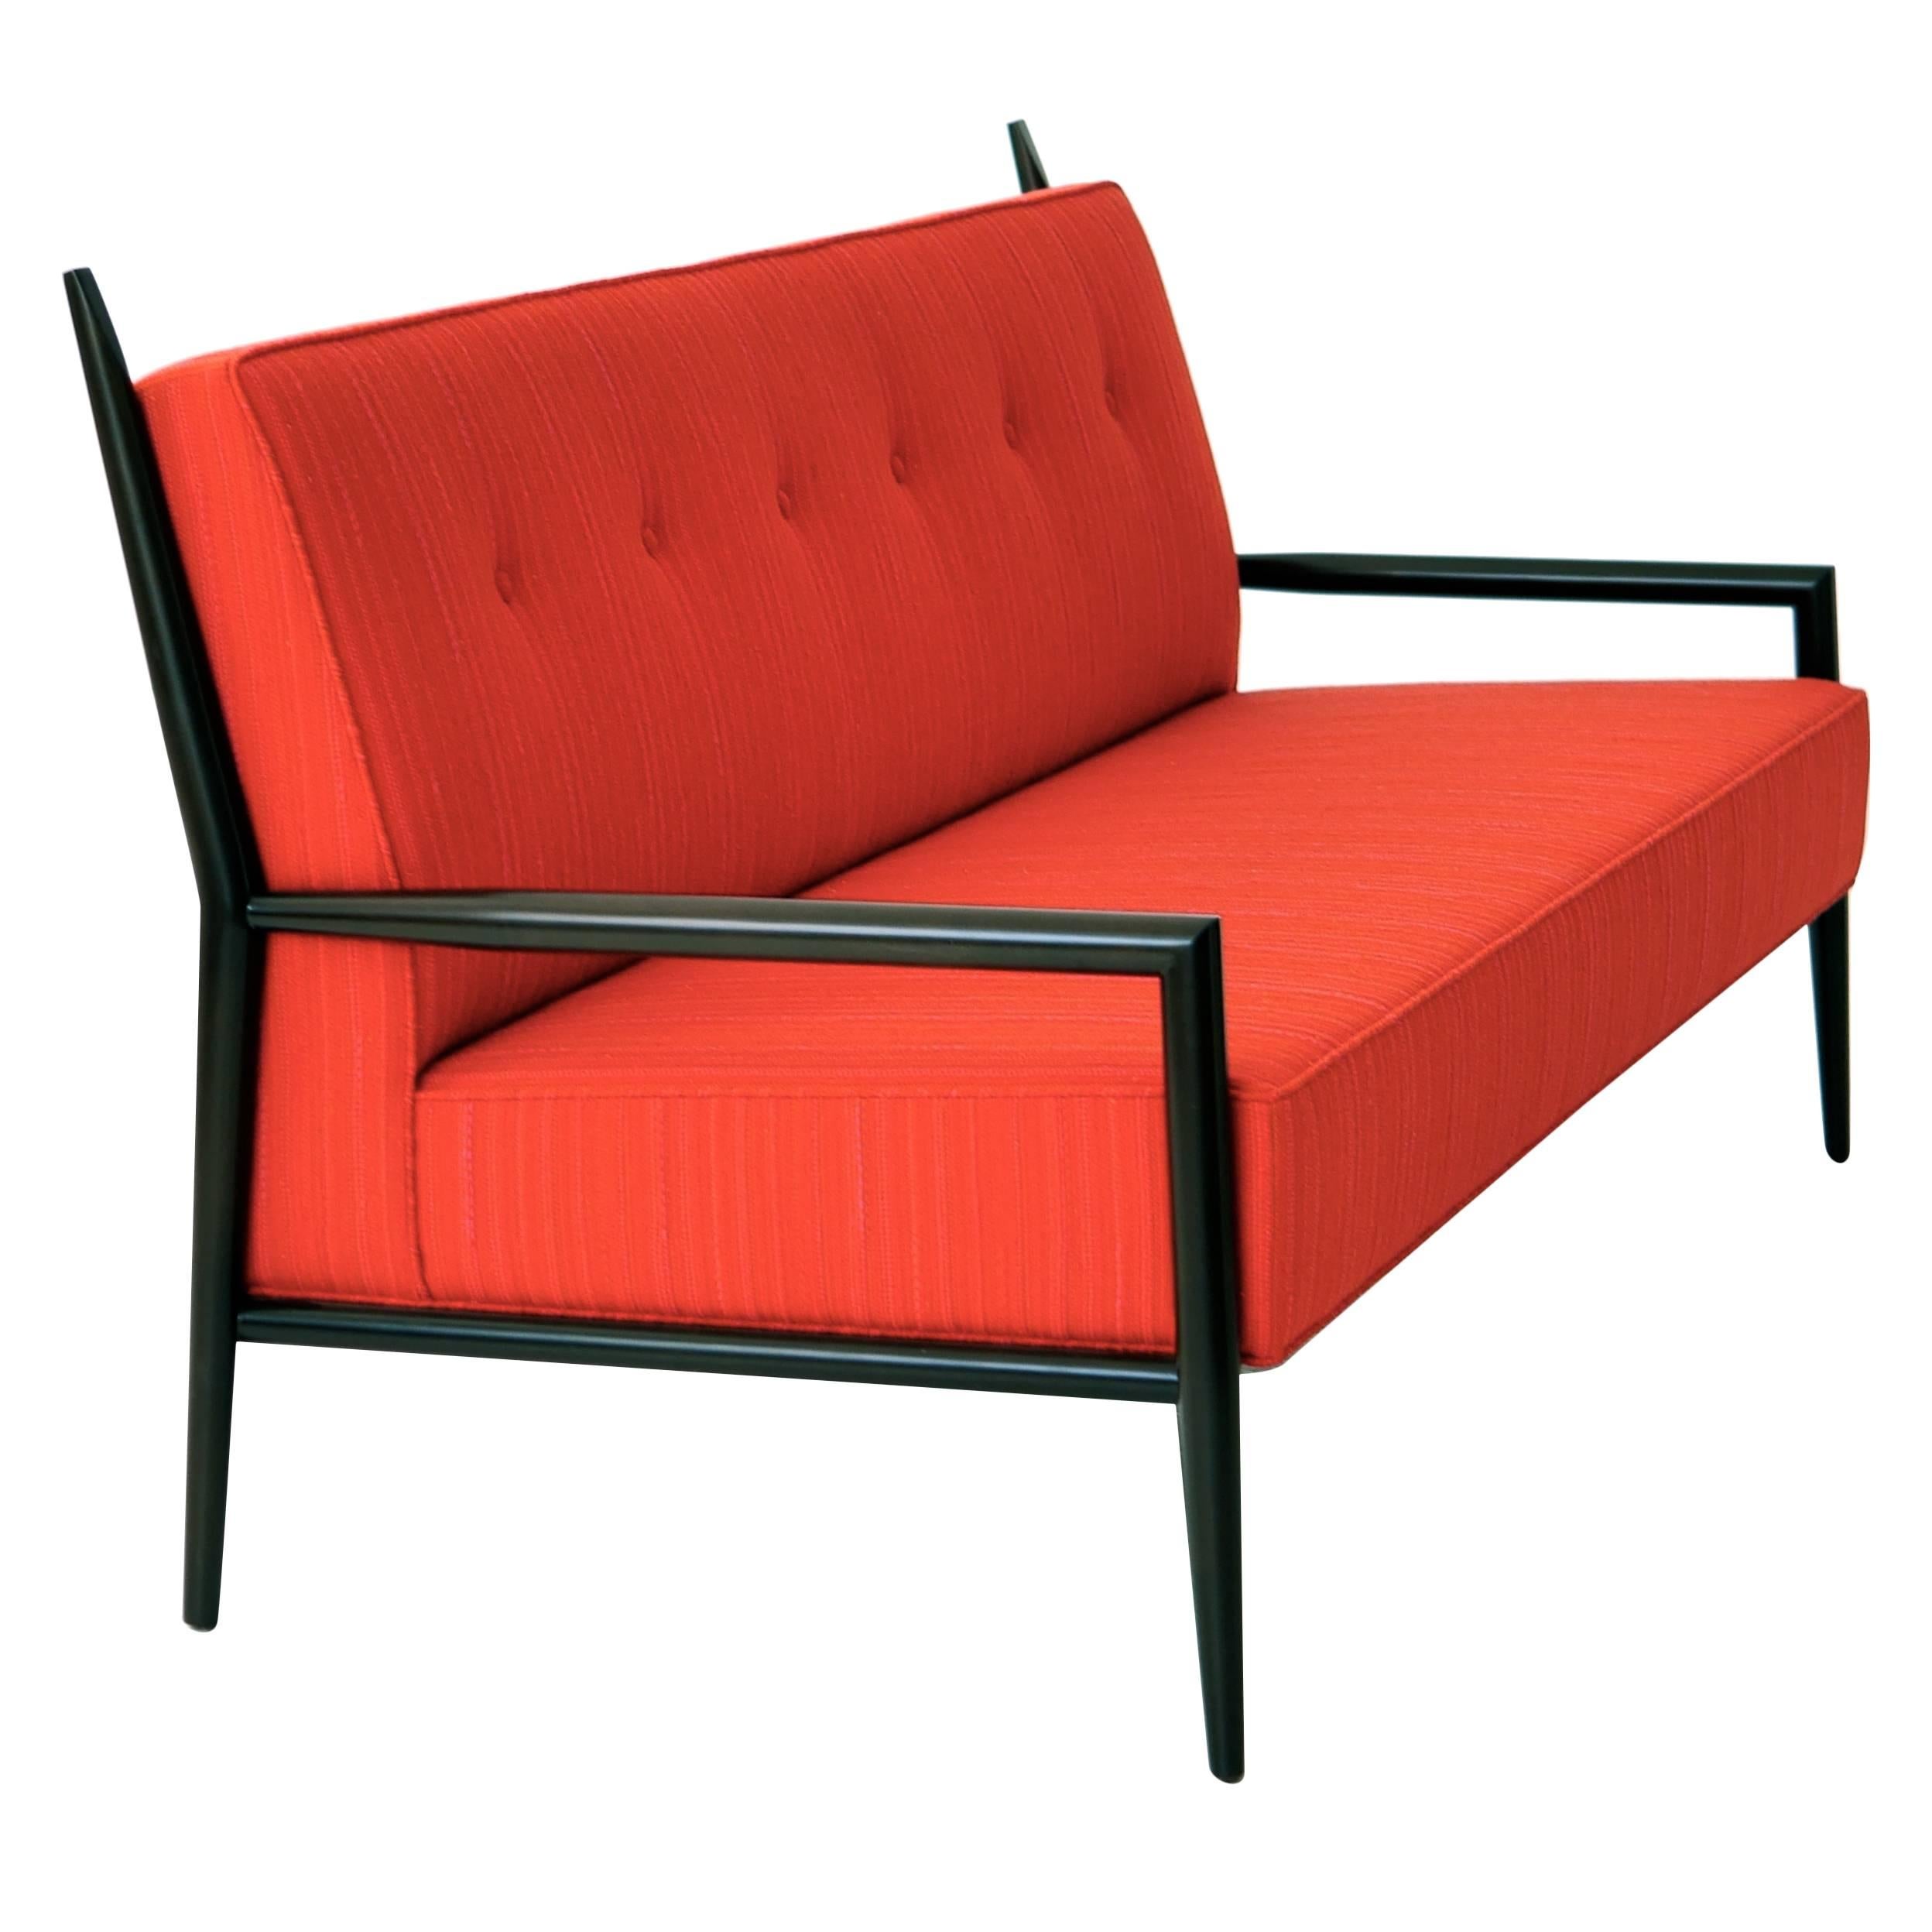 This McCobb sofa has been recovered in Knoll dynamic, radiant.